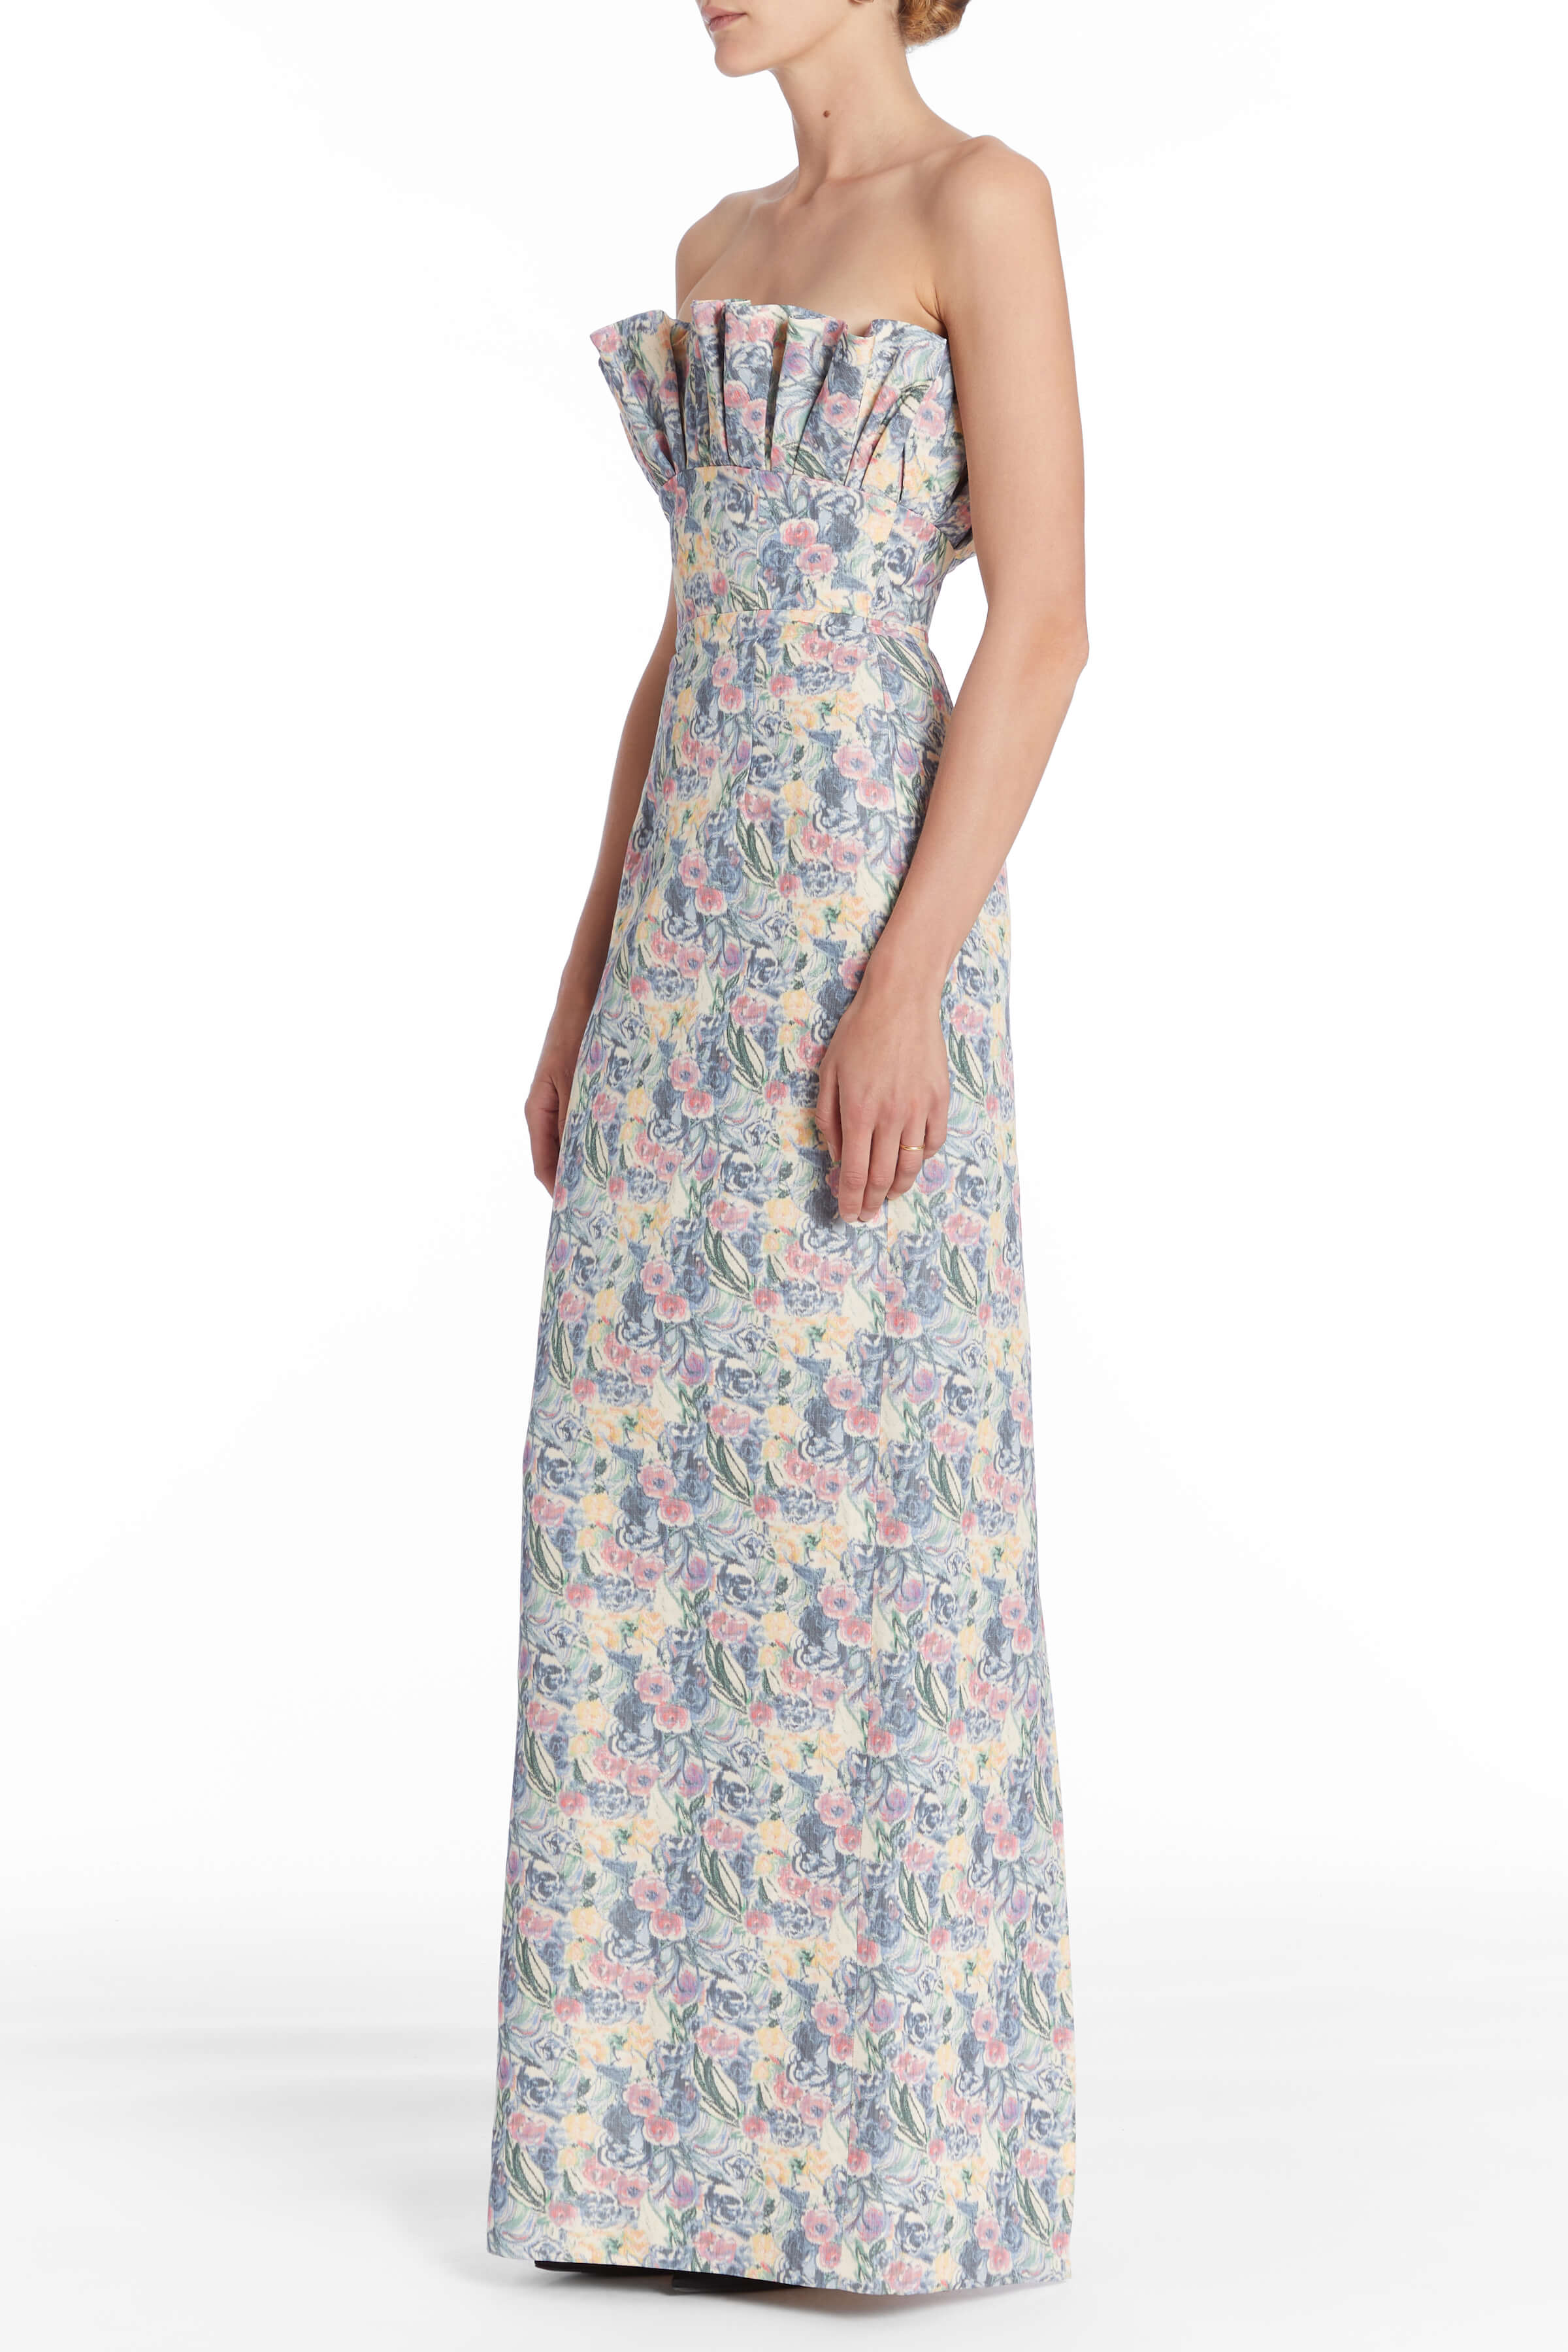 Demetra Floral Ruffled Bodice Gown